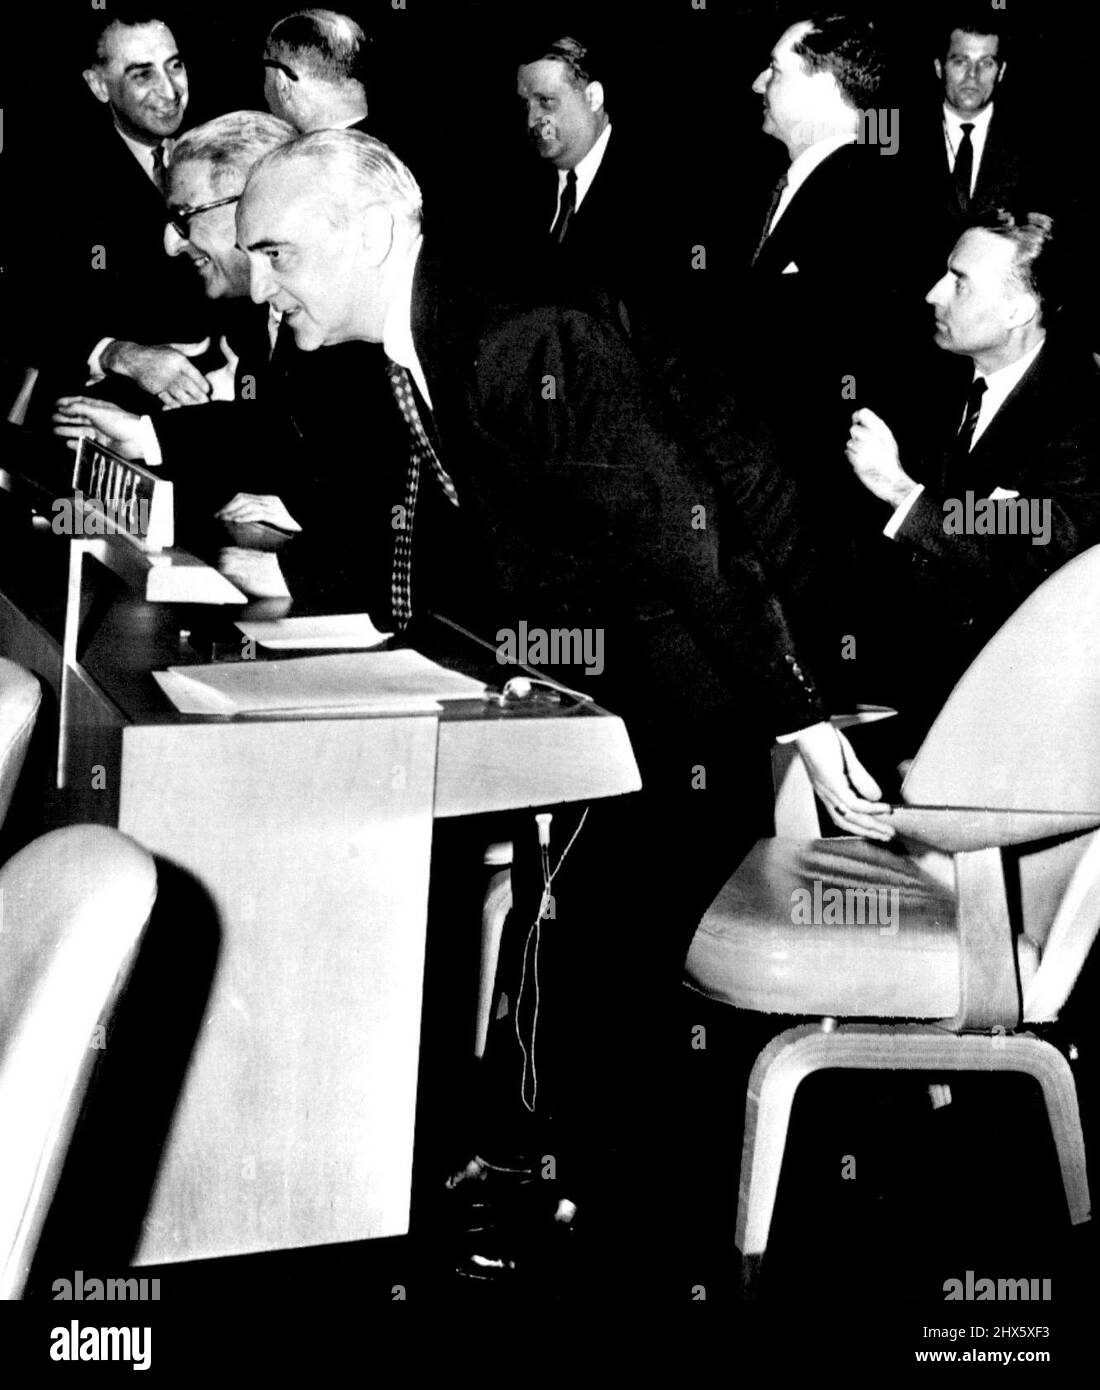 France Ends Boycott - Jules Moch, left and Herve Alphand, representatives to United Nations from France, take their seats in the General Assembly here today, thus ending two-months- old boycott over the Algerian issue. Their return coincided with the fall of Premier Edgar Faure's government in Paris. November 29, 1955. (Photo by AP Wirephoto). Stock Photo